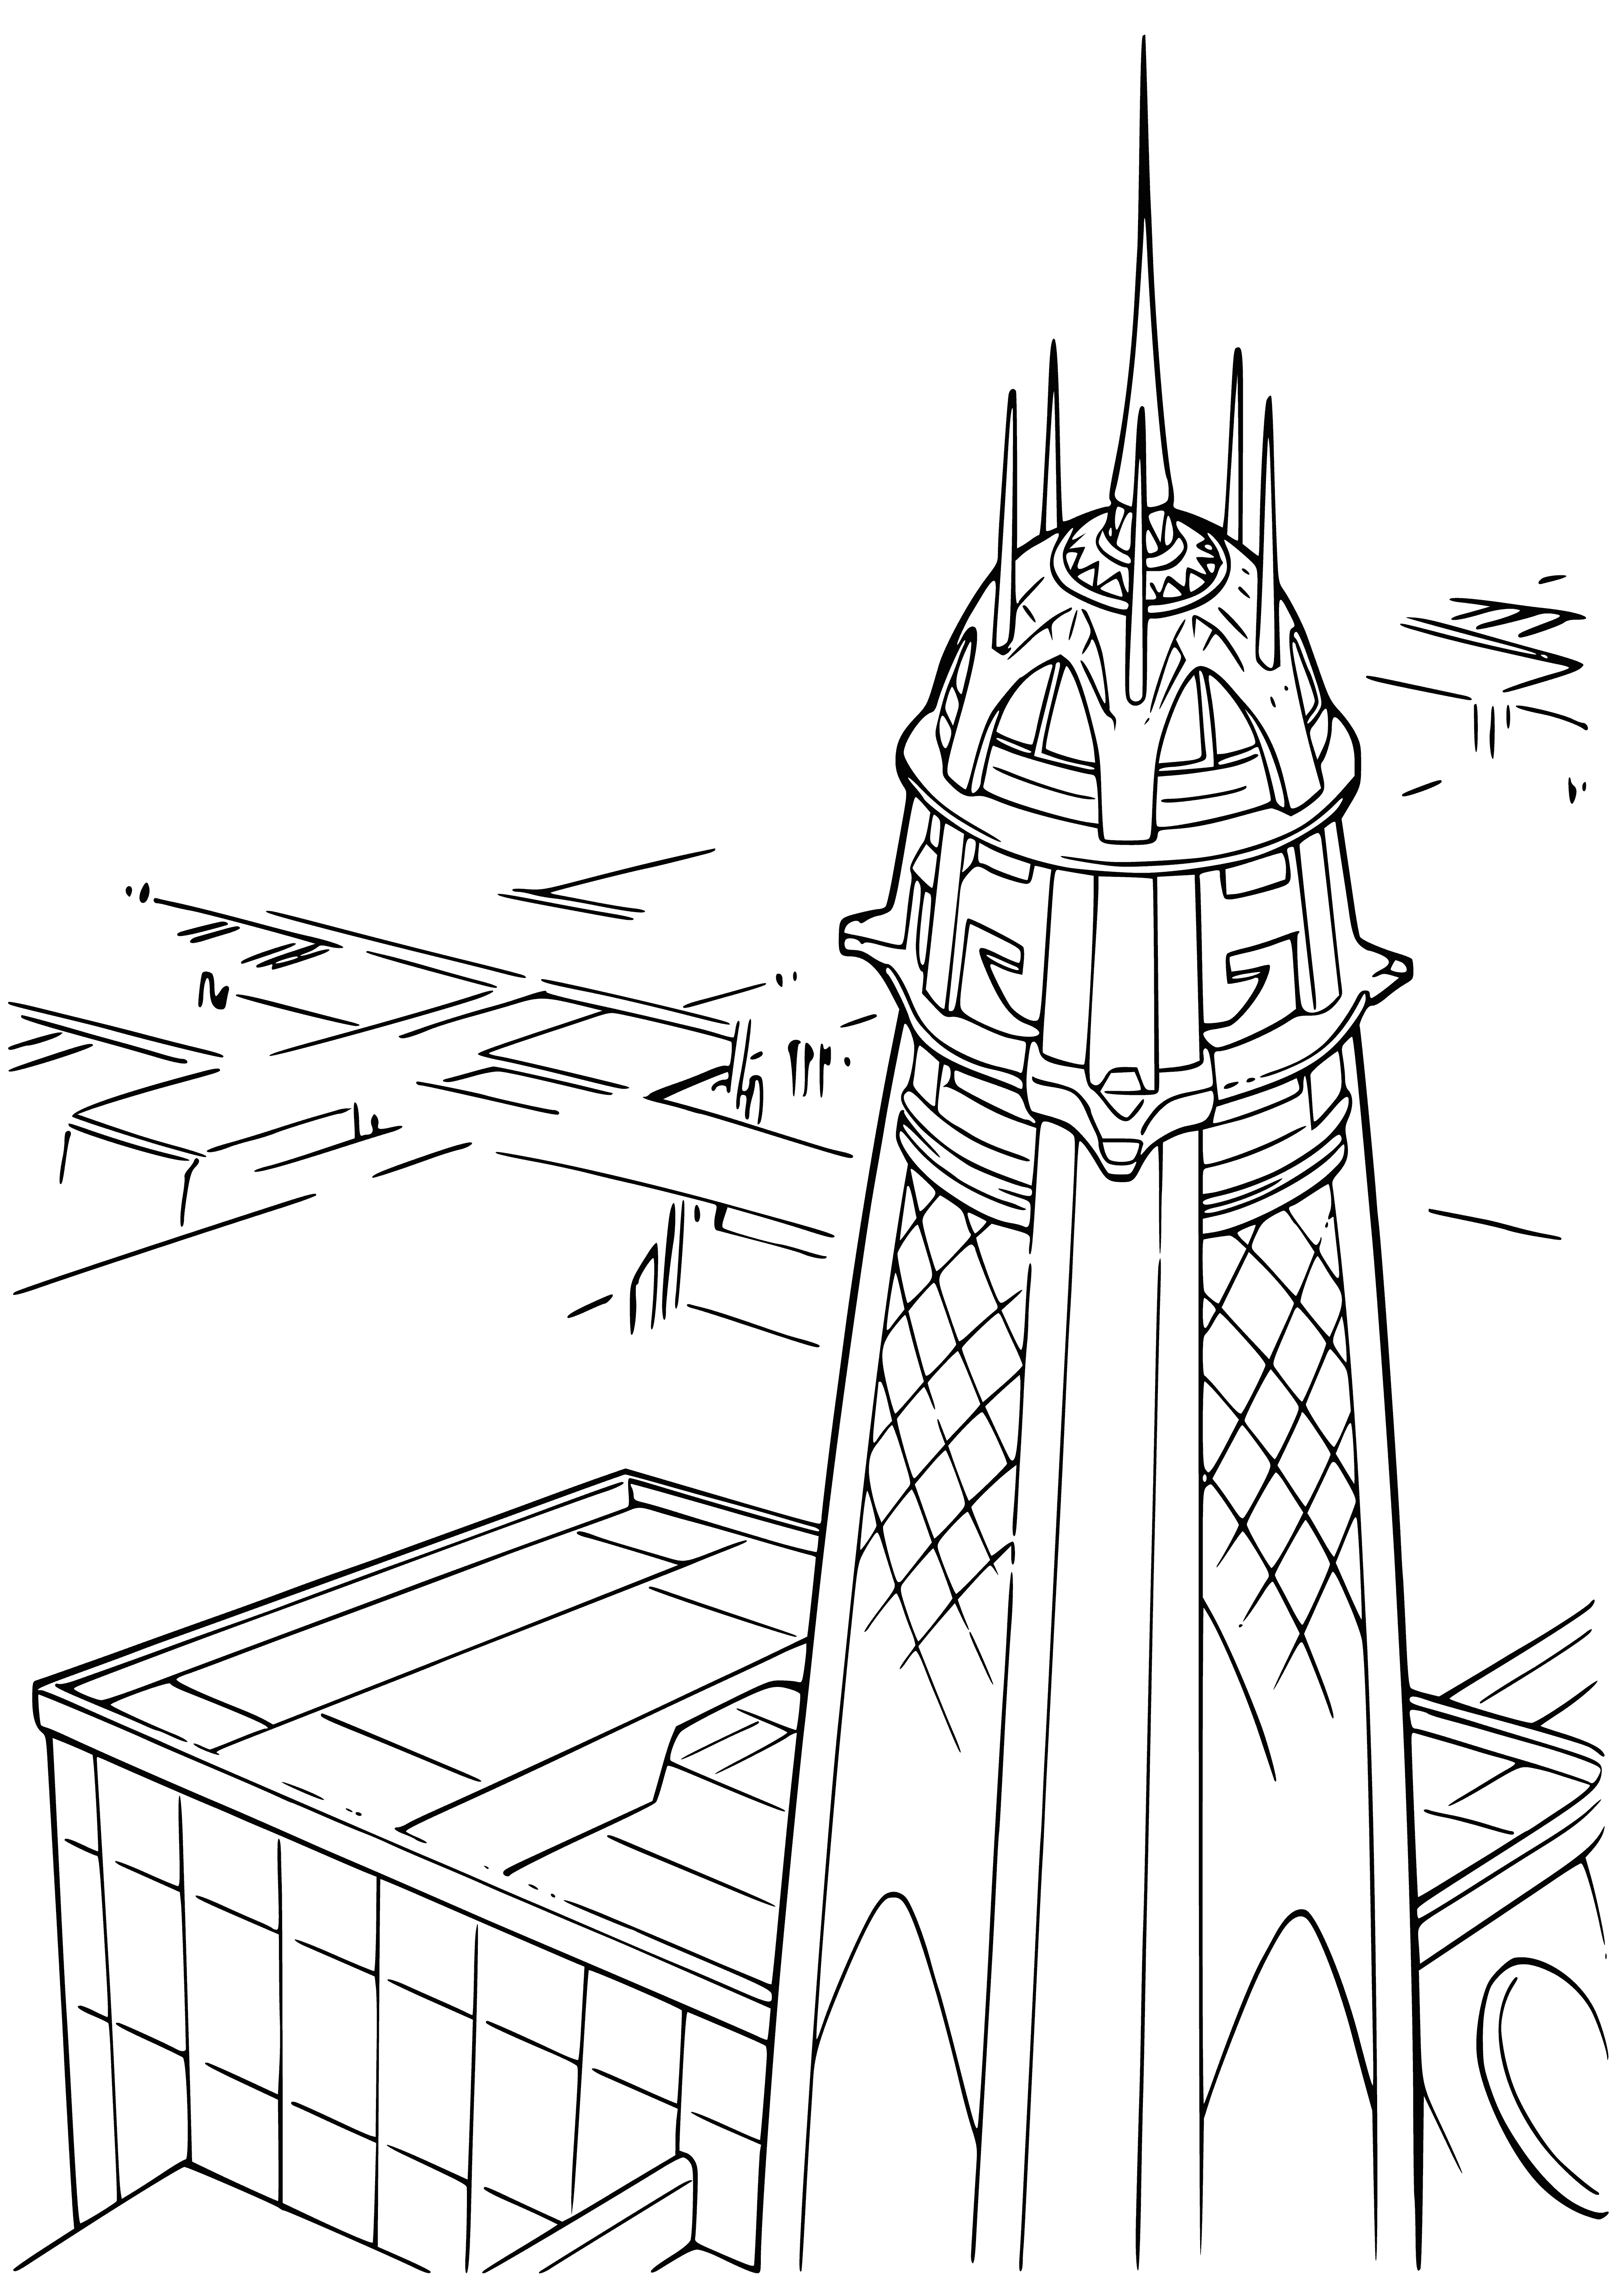 coloring page: Jedi Temple on Coruscant is a vast, imposing structure with tall spires & windows, the headquarters of the Jedi Order peacekeepers of the Galactic Republic. Inside is a vast chamber with a balcony for the Jedi Council, the high-ranking Jedi who make decisions.